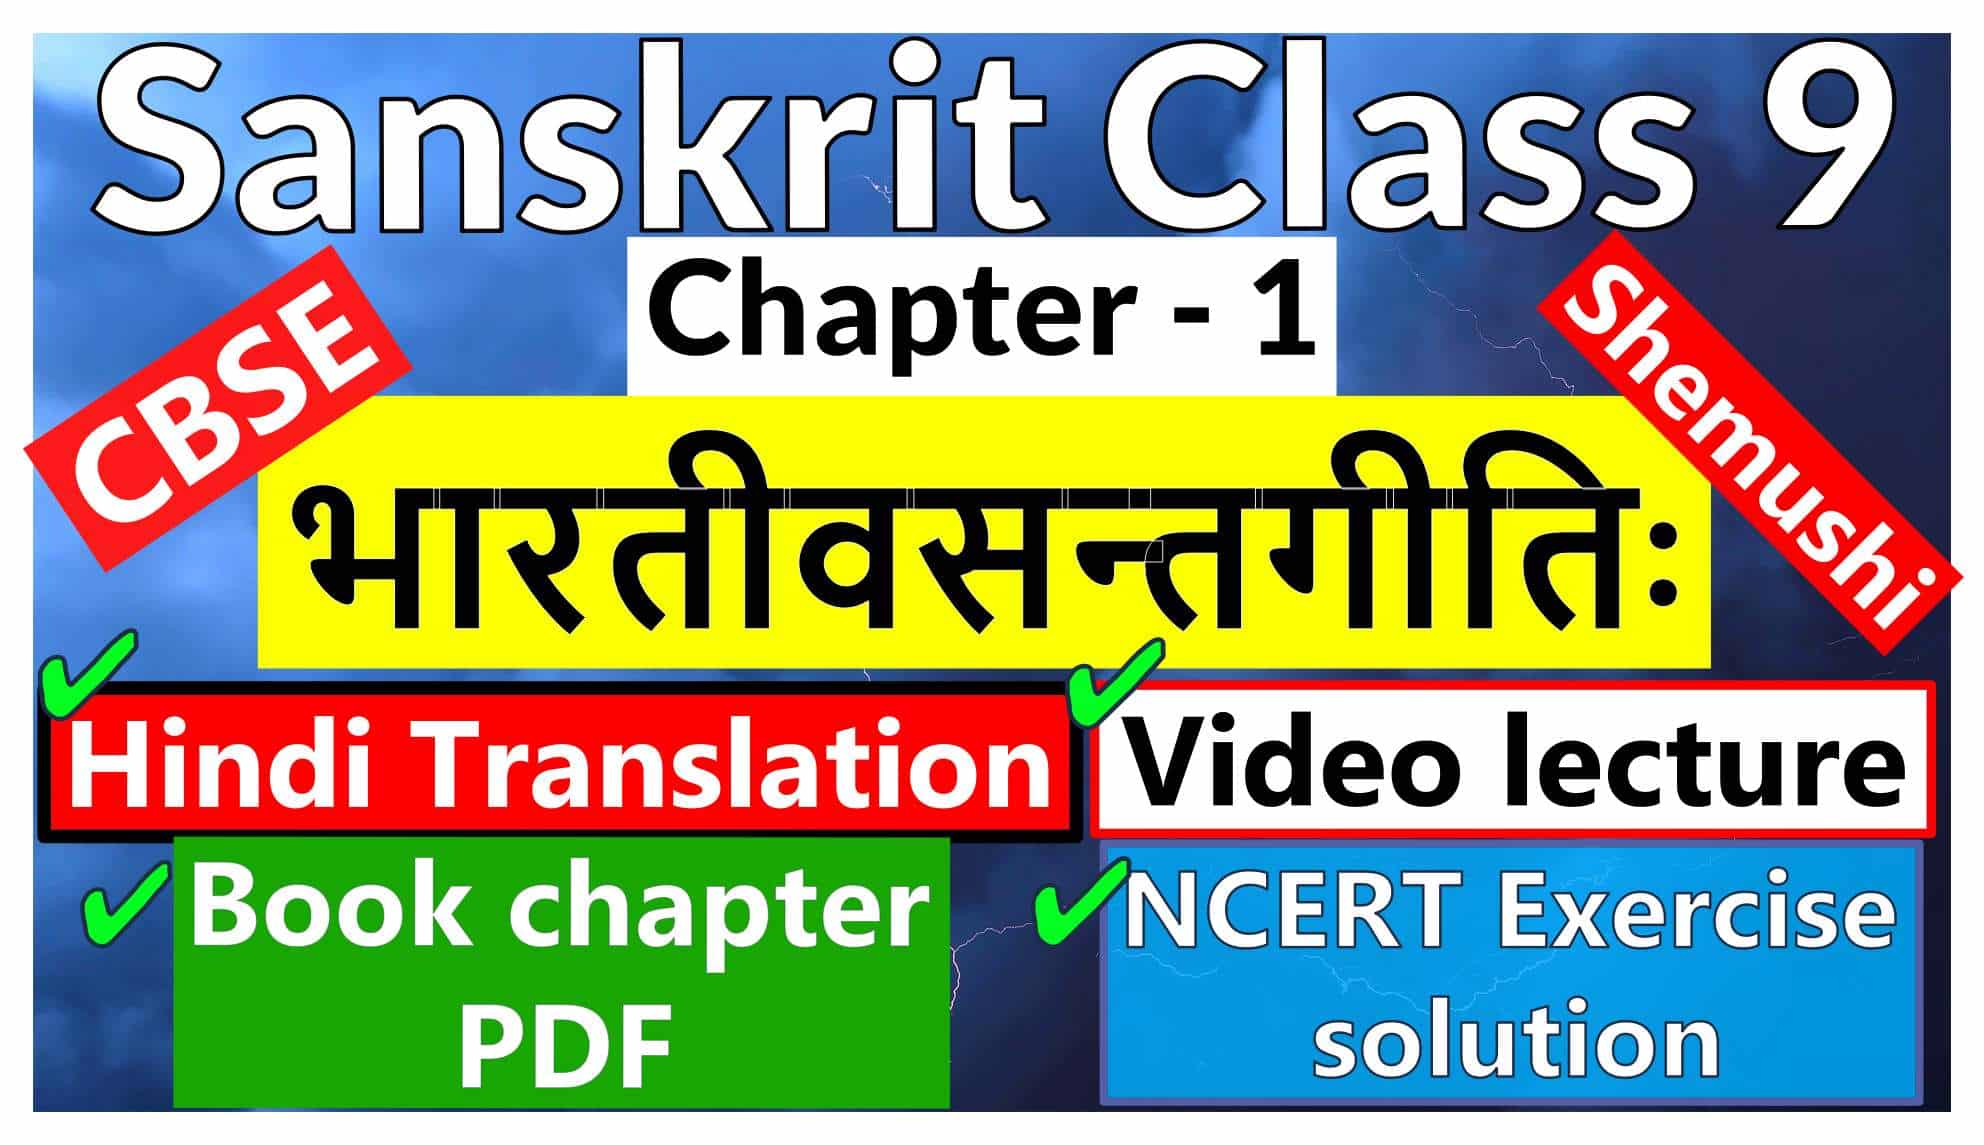 CBSE Sanskrit Class 9 Shemushi Chapter 1 - भारतीवसन्तगीतिः - Hindi Translation, Video lecture, NCERT Exercise solution (Question-Answer), Book chapter PDF